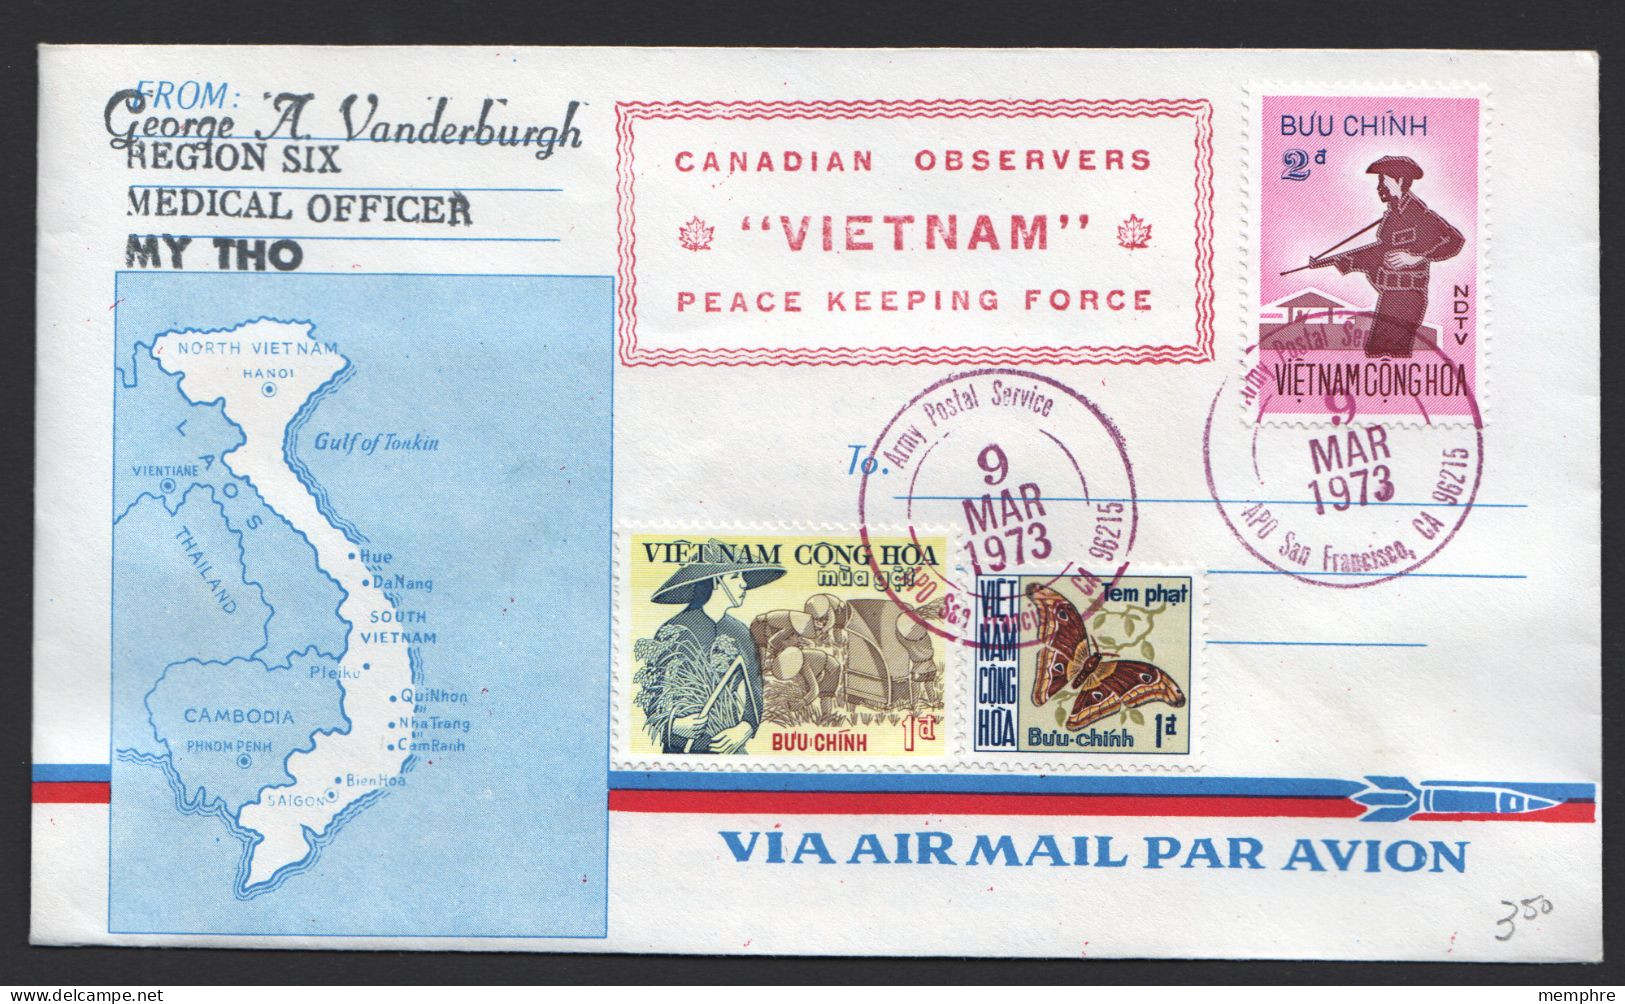 1973   Canadian Observers Peace Keeping Force Cover  US Army PO Cancel - Vietnam